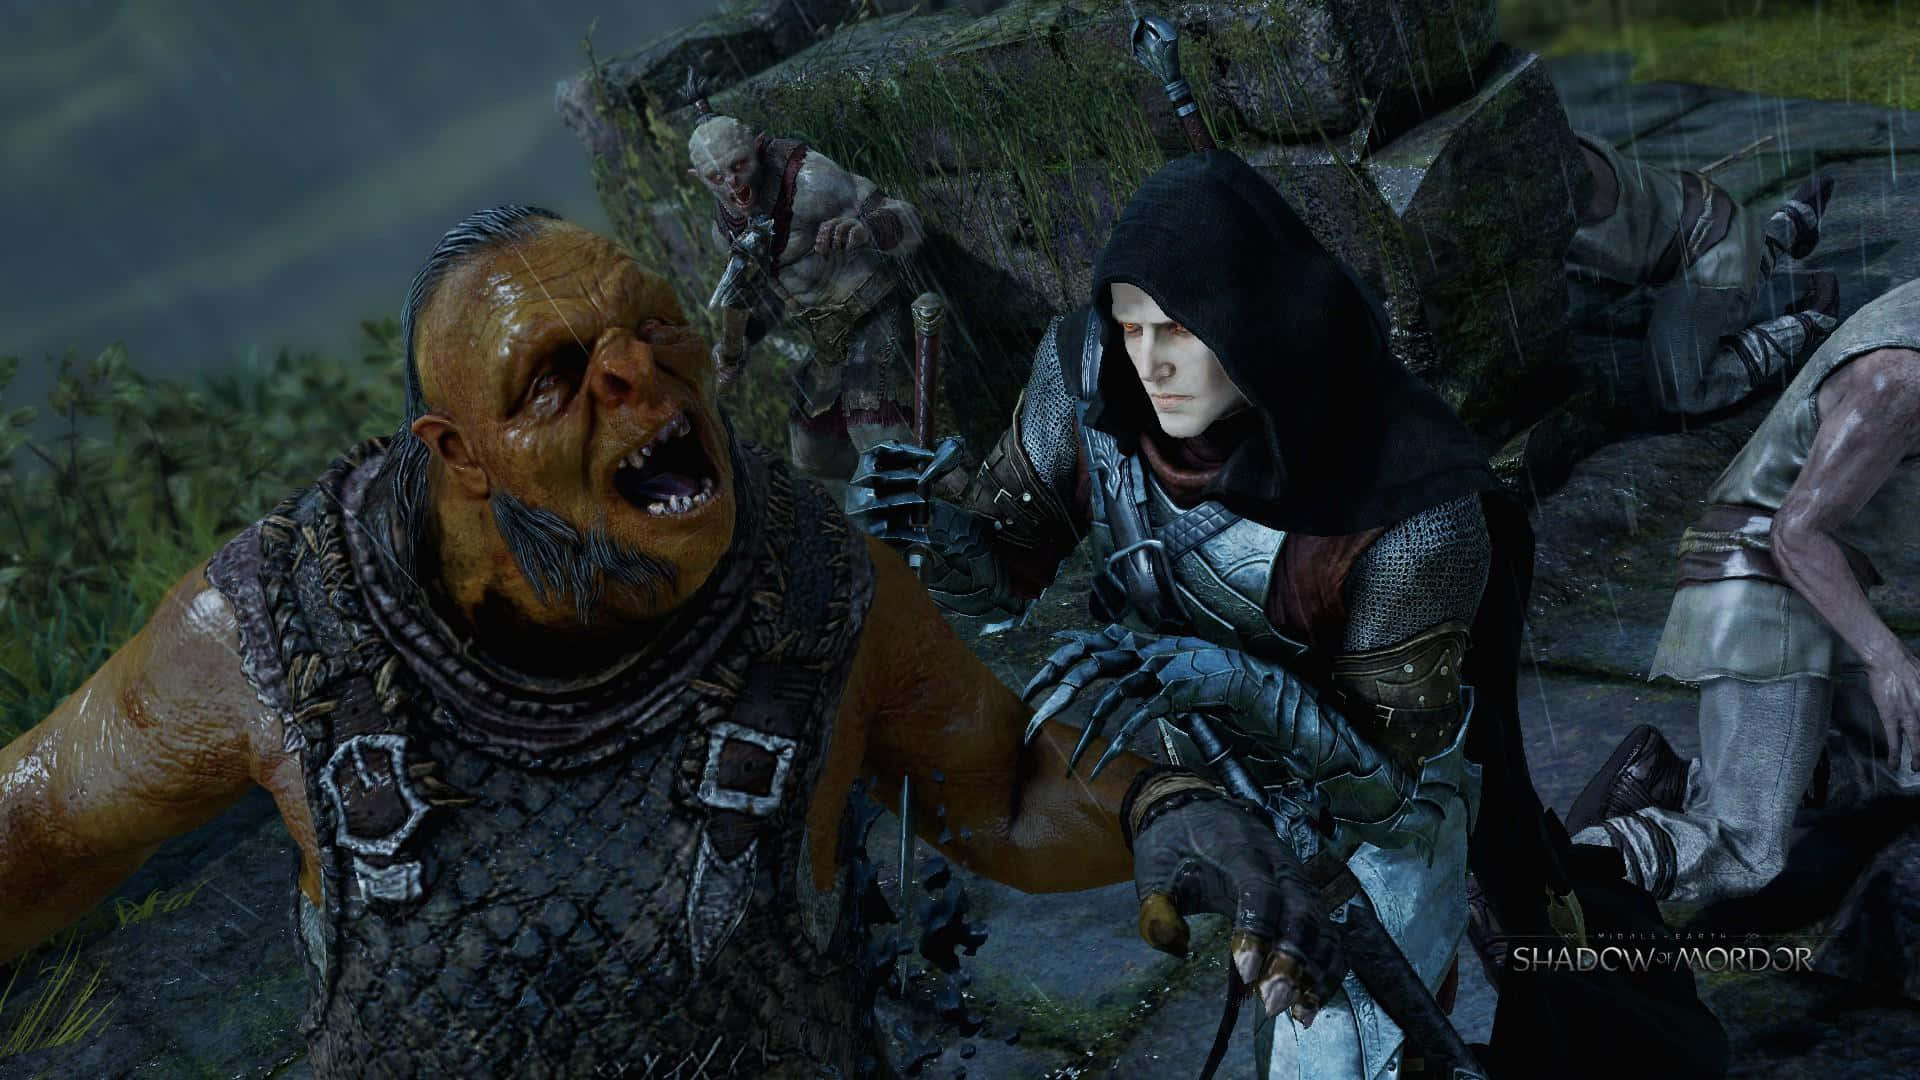 Majestic Middle Earth awaits you in Shadow Of Mordor.